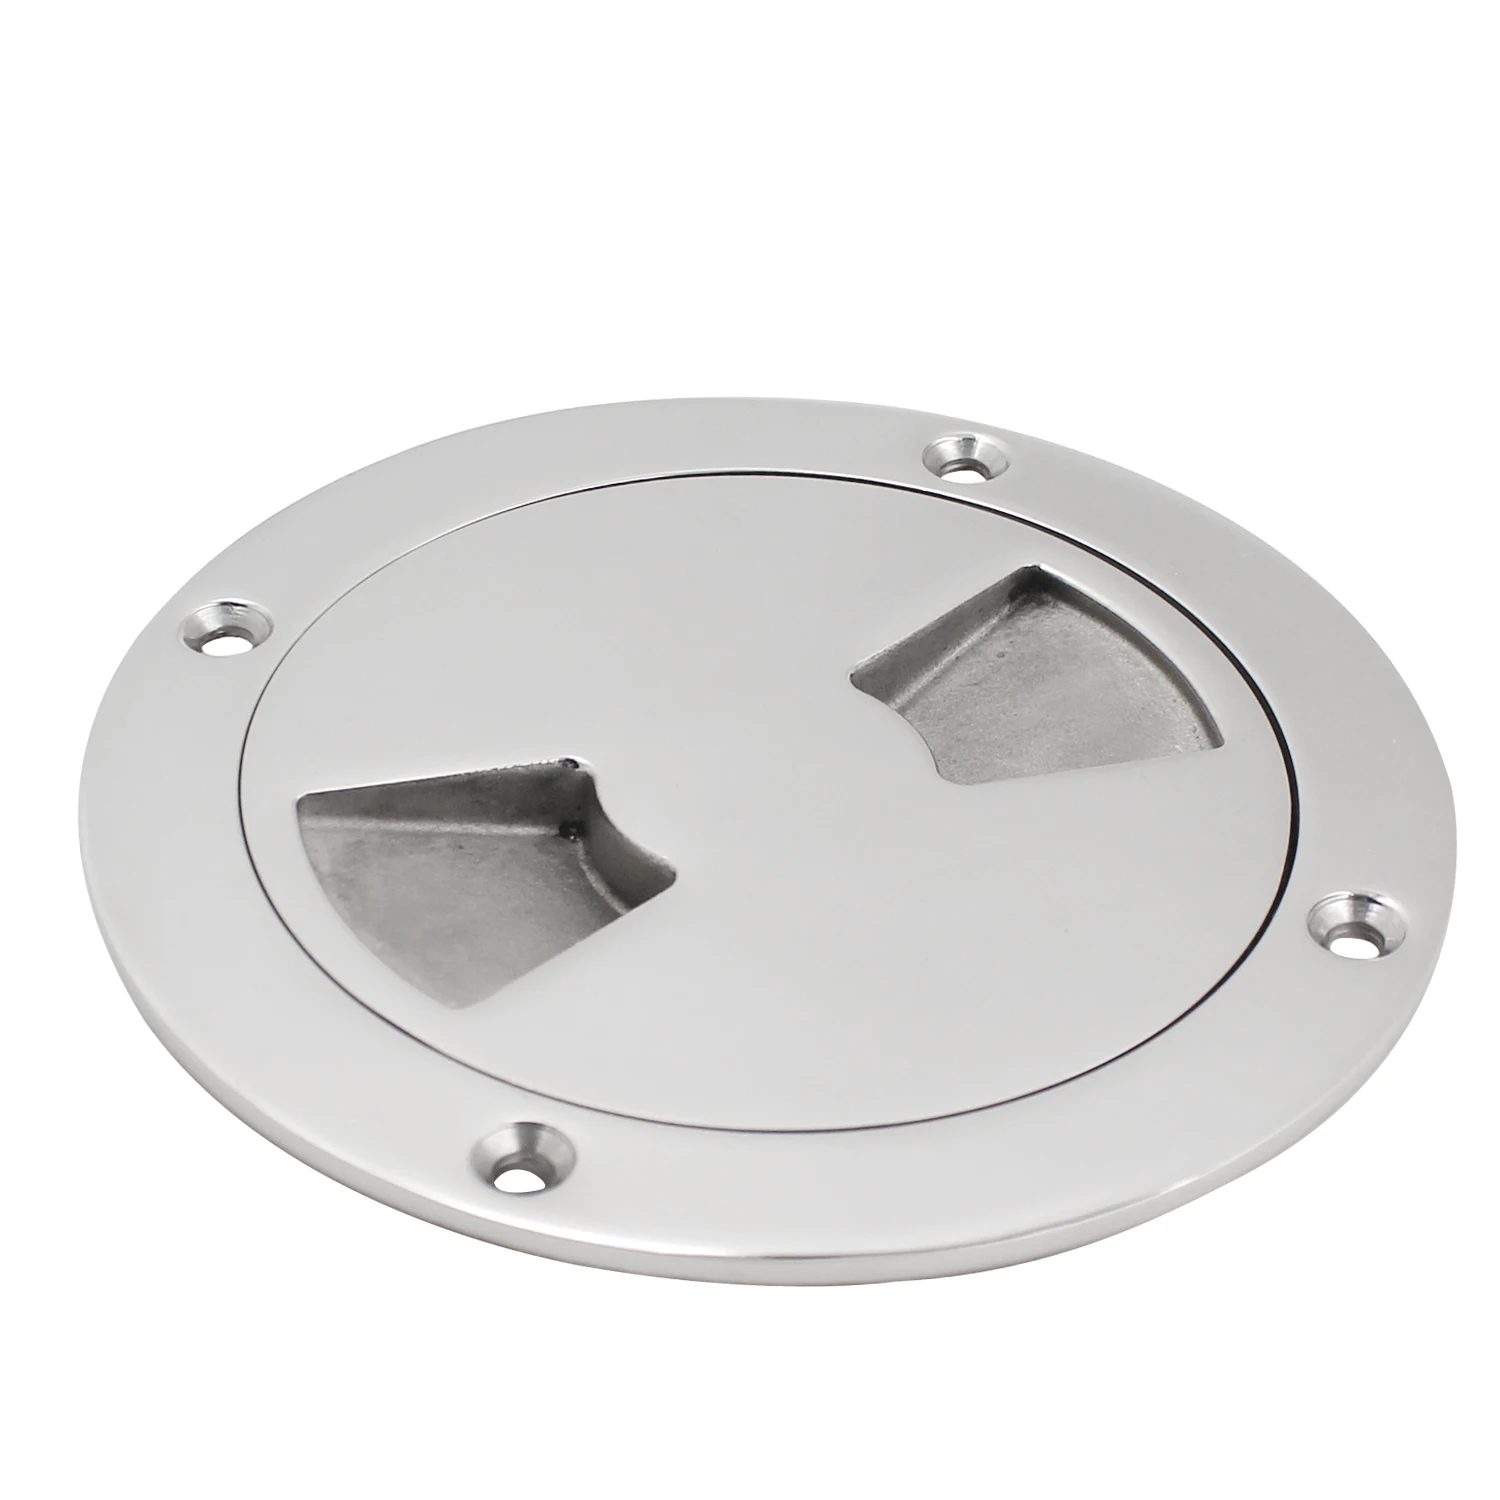 3 inch Round Deck Inspection Access Hatch Cover Boat Screw Out Deck Inspection Plate For Yacht Marine enlarge